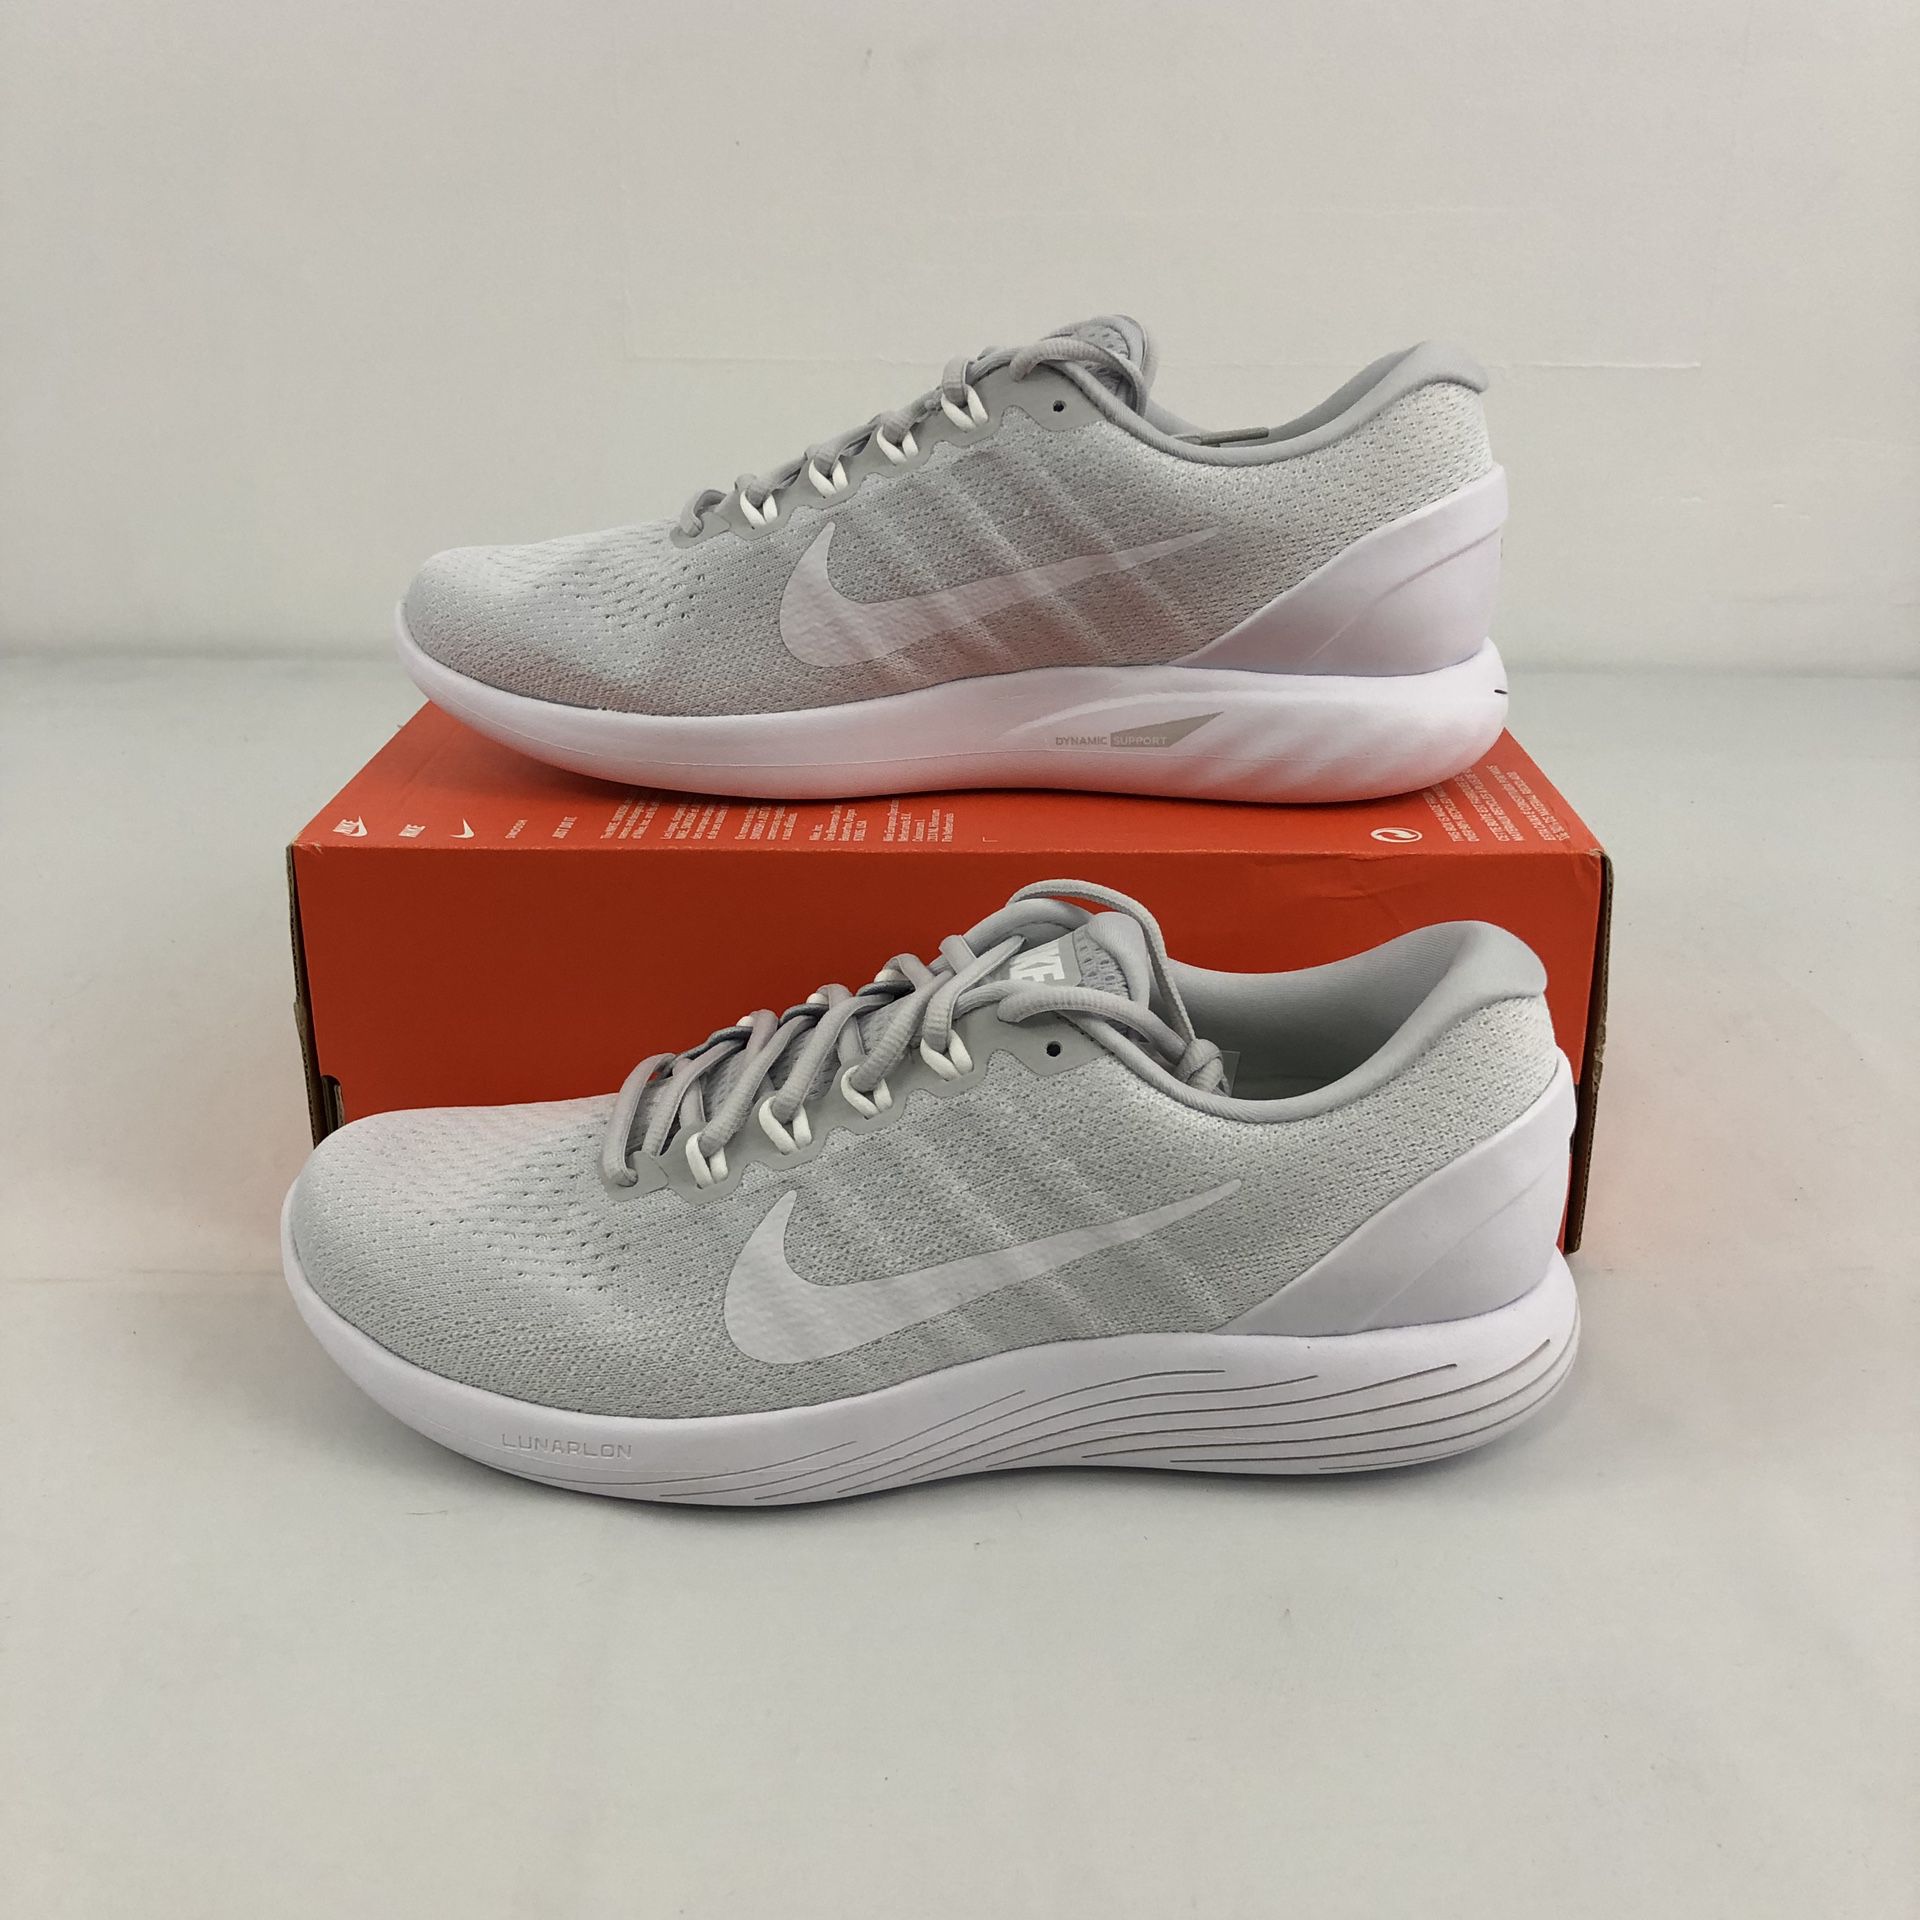 Nike Lunarglide 9 Running Shoes Size 10.5 904715 003 in Coram, NY - OfferUp